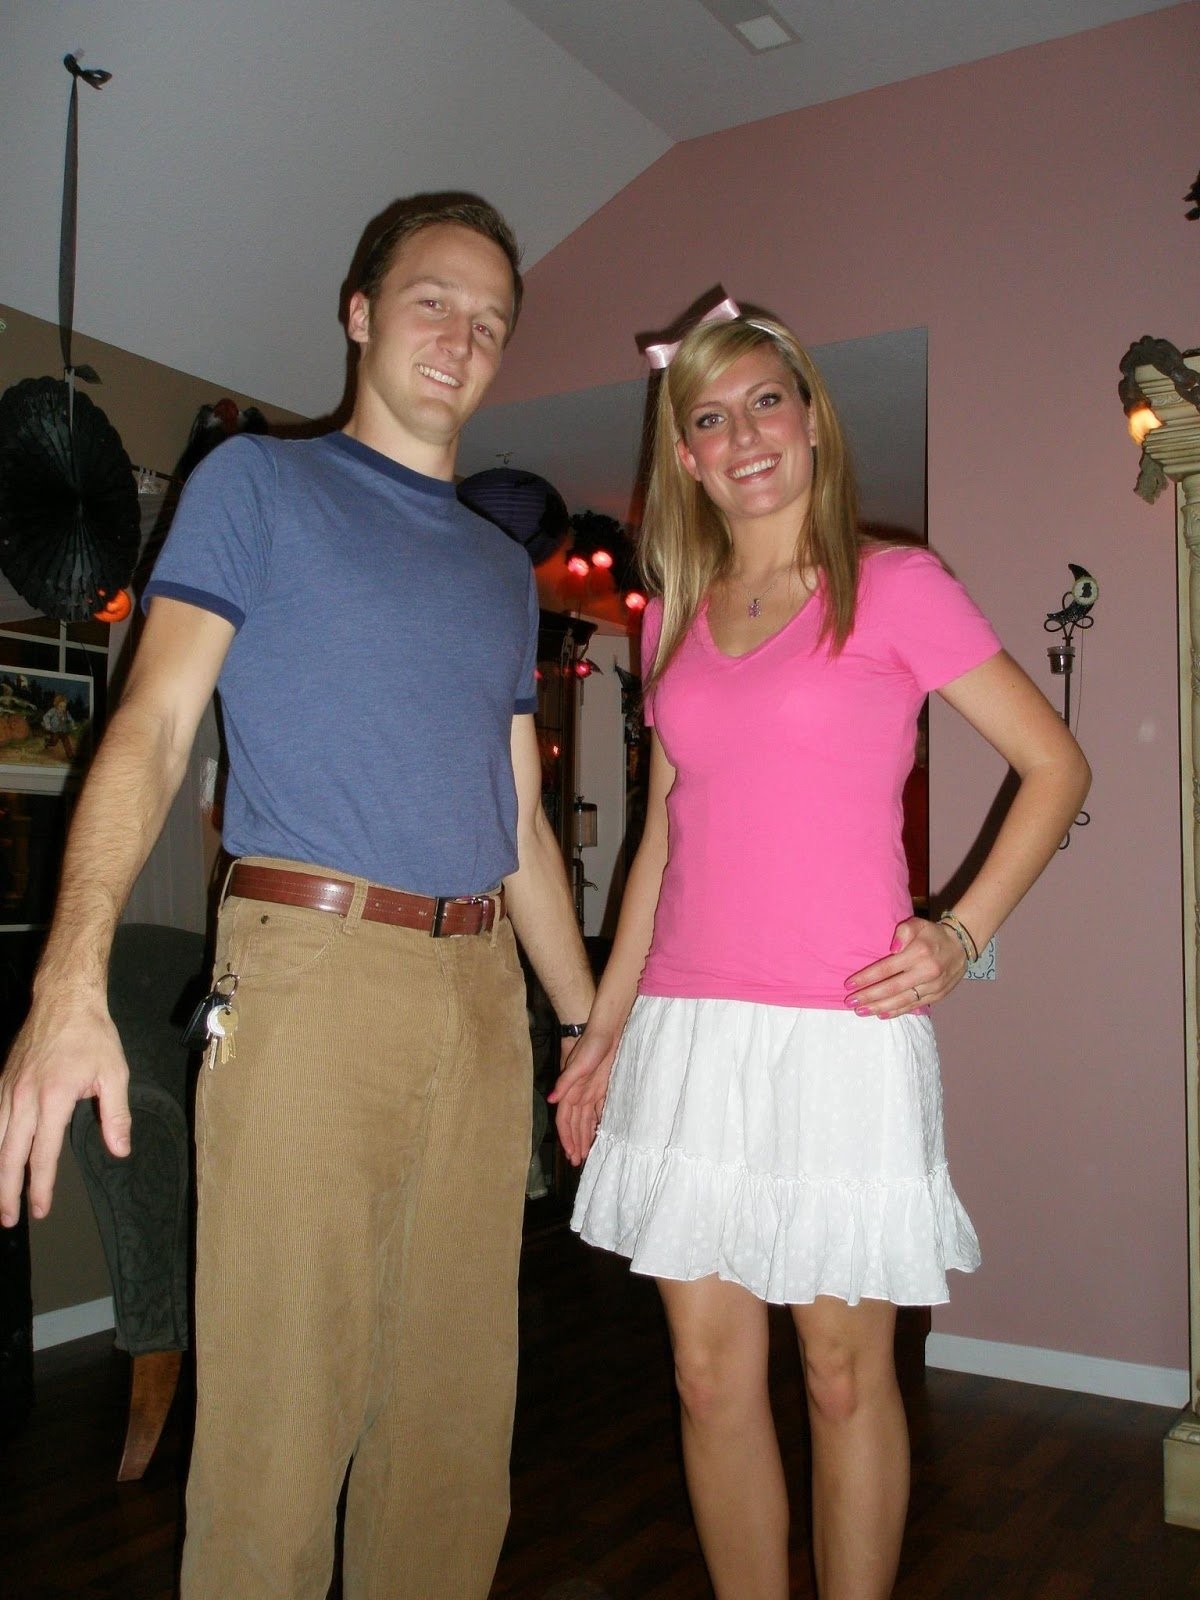 10 Perfect Couples Funny Halloween Costume Ideas 57 couples diy costumes best 25 halloween couples ideas on 15 2022